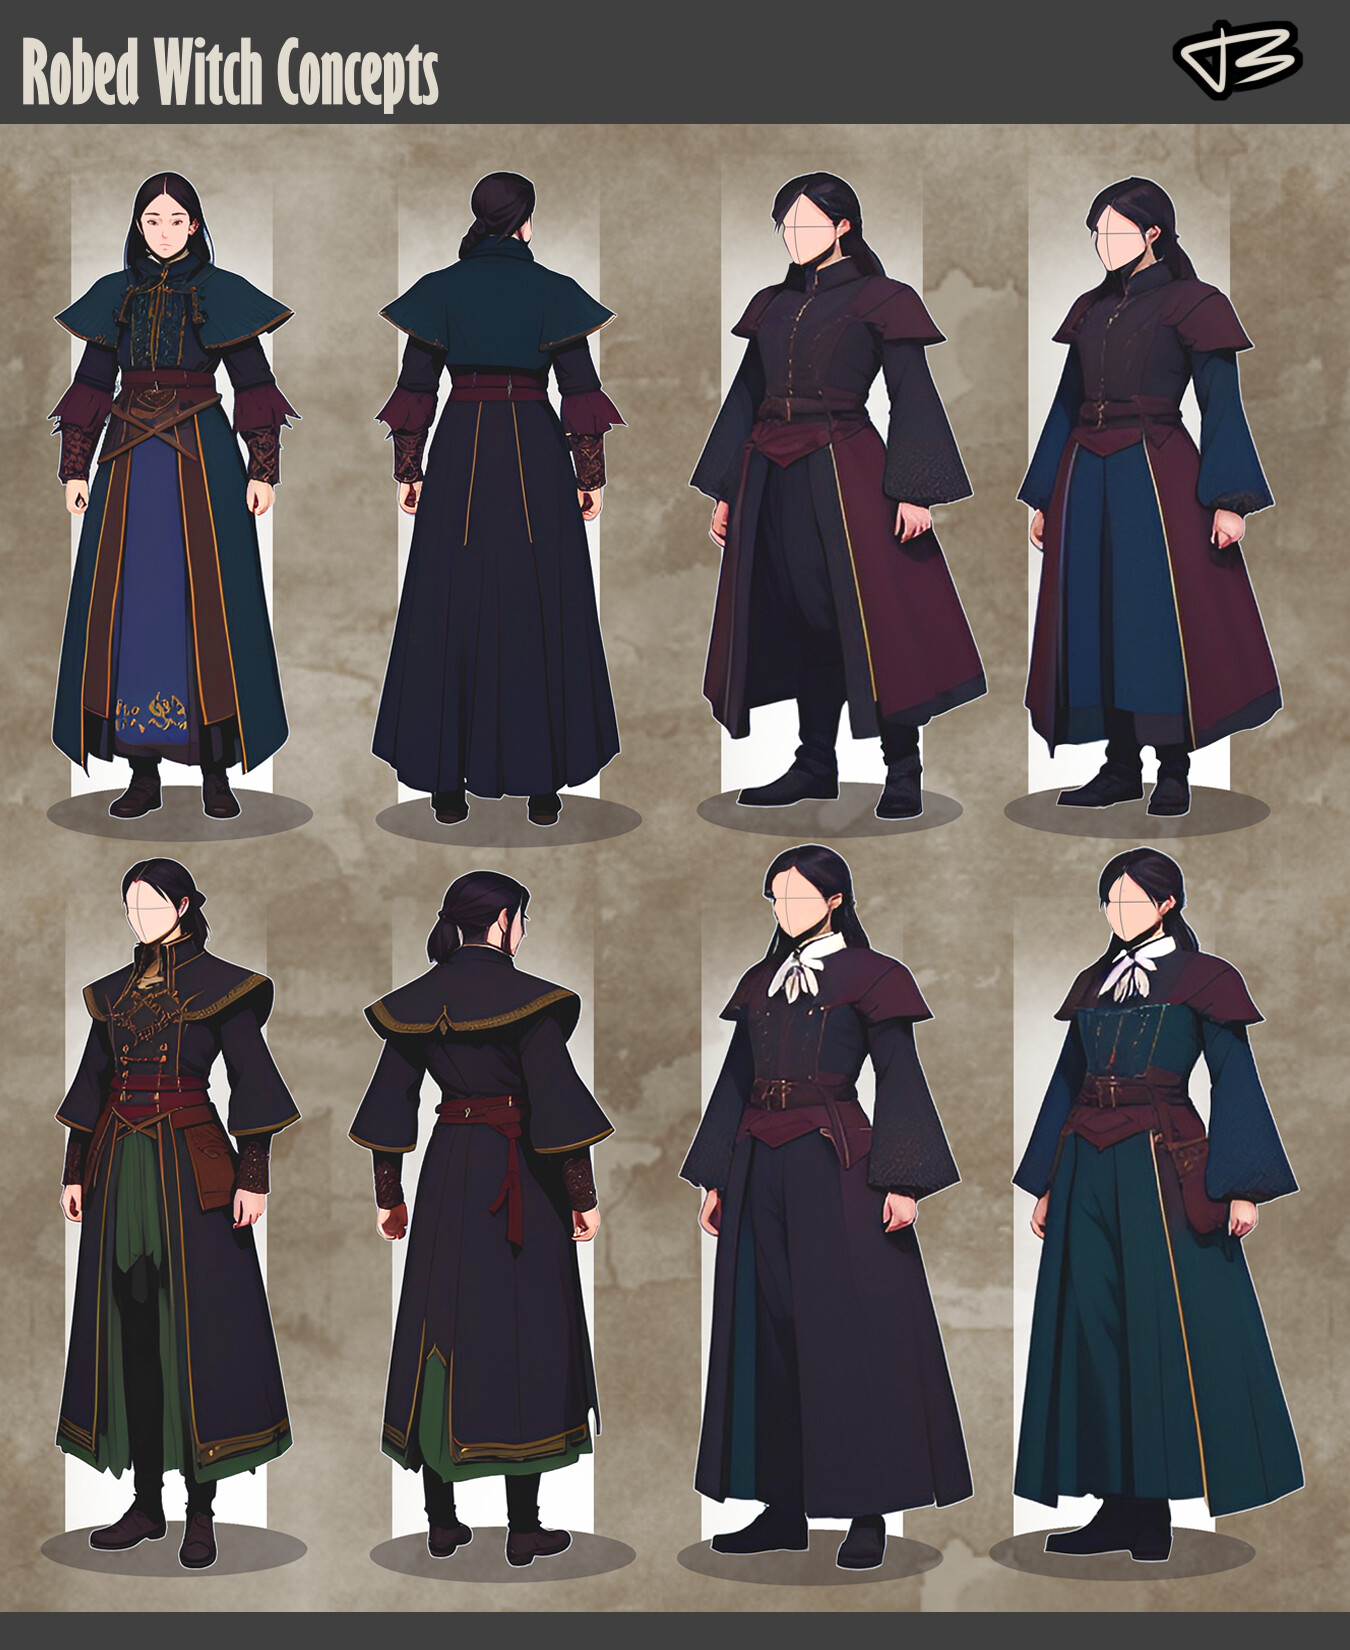 ArtStation - Robed Witch Concepts